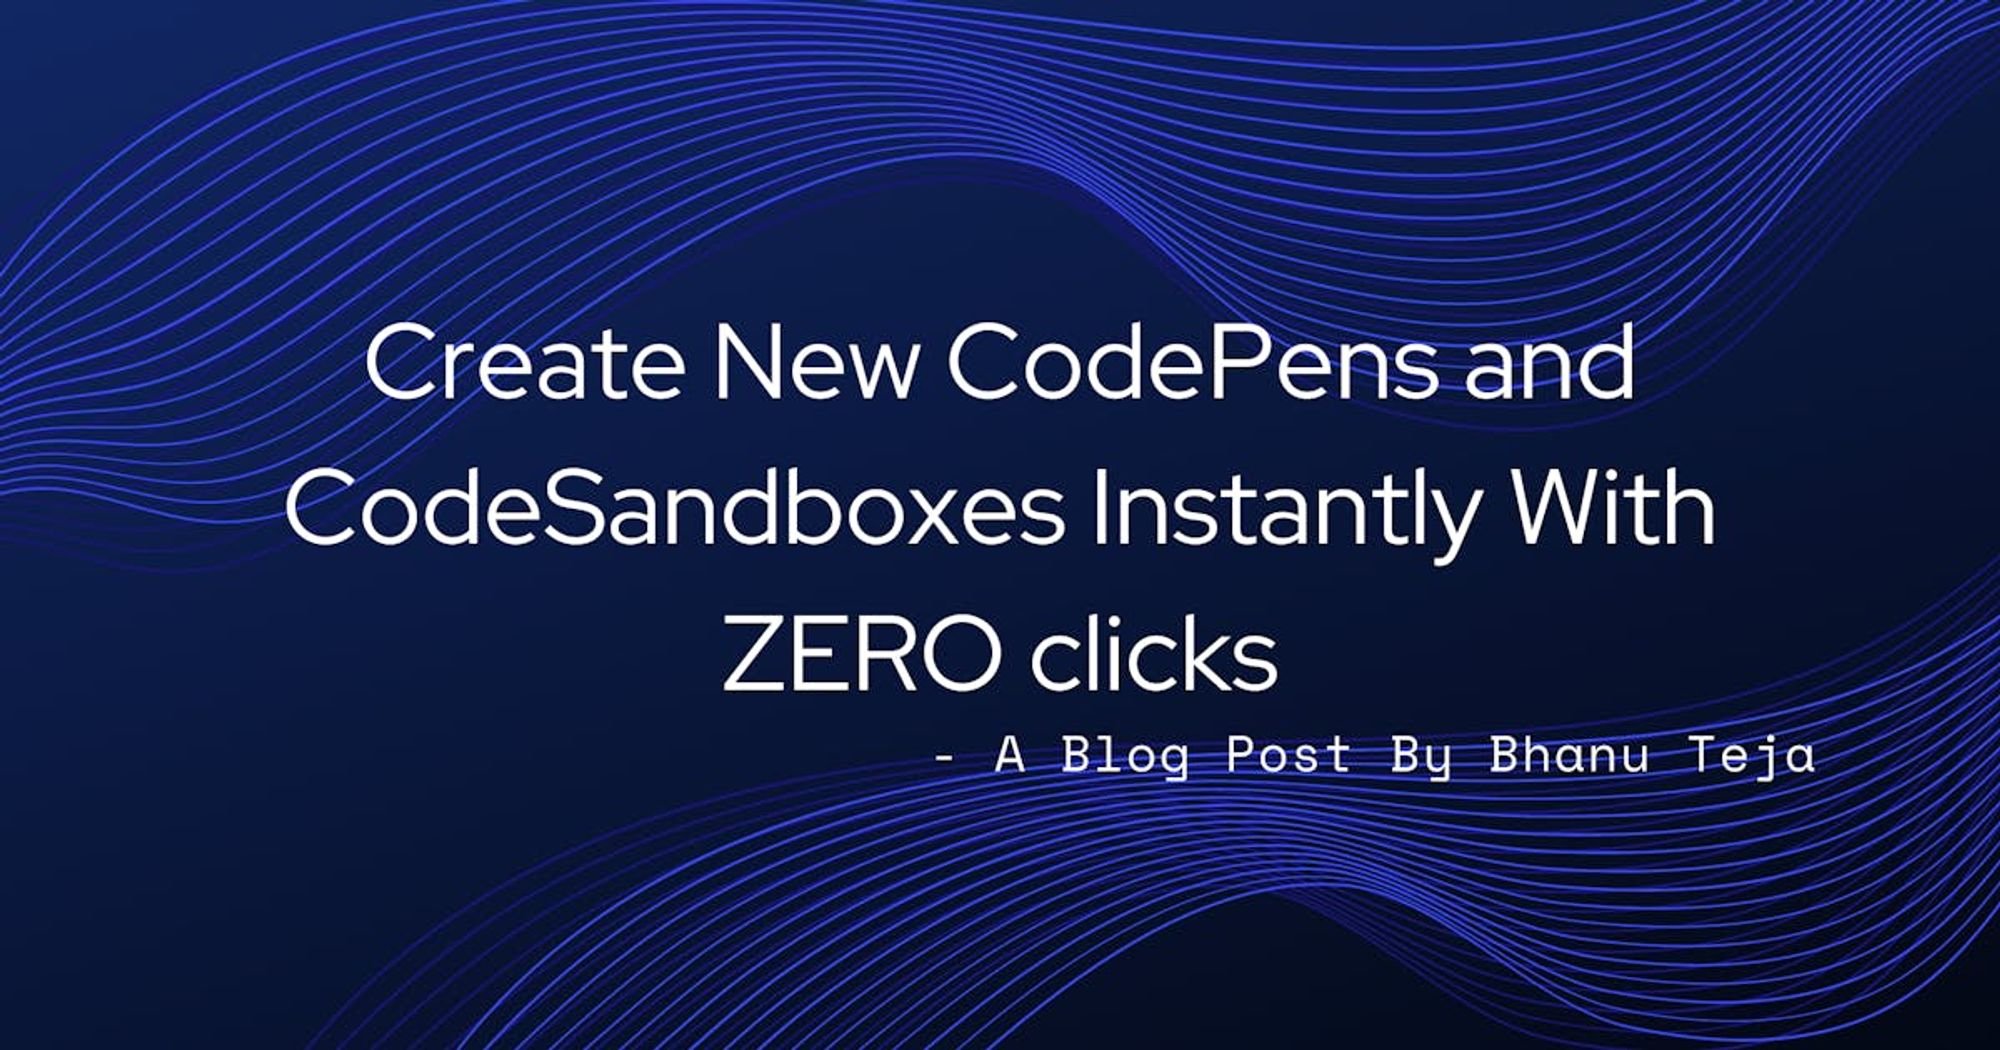 Create New CodePens and CodeSandboxes Instantly With ZERO clicks